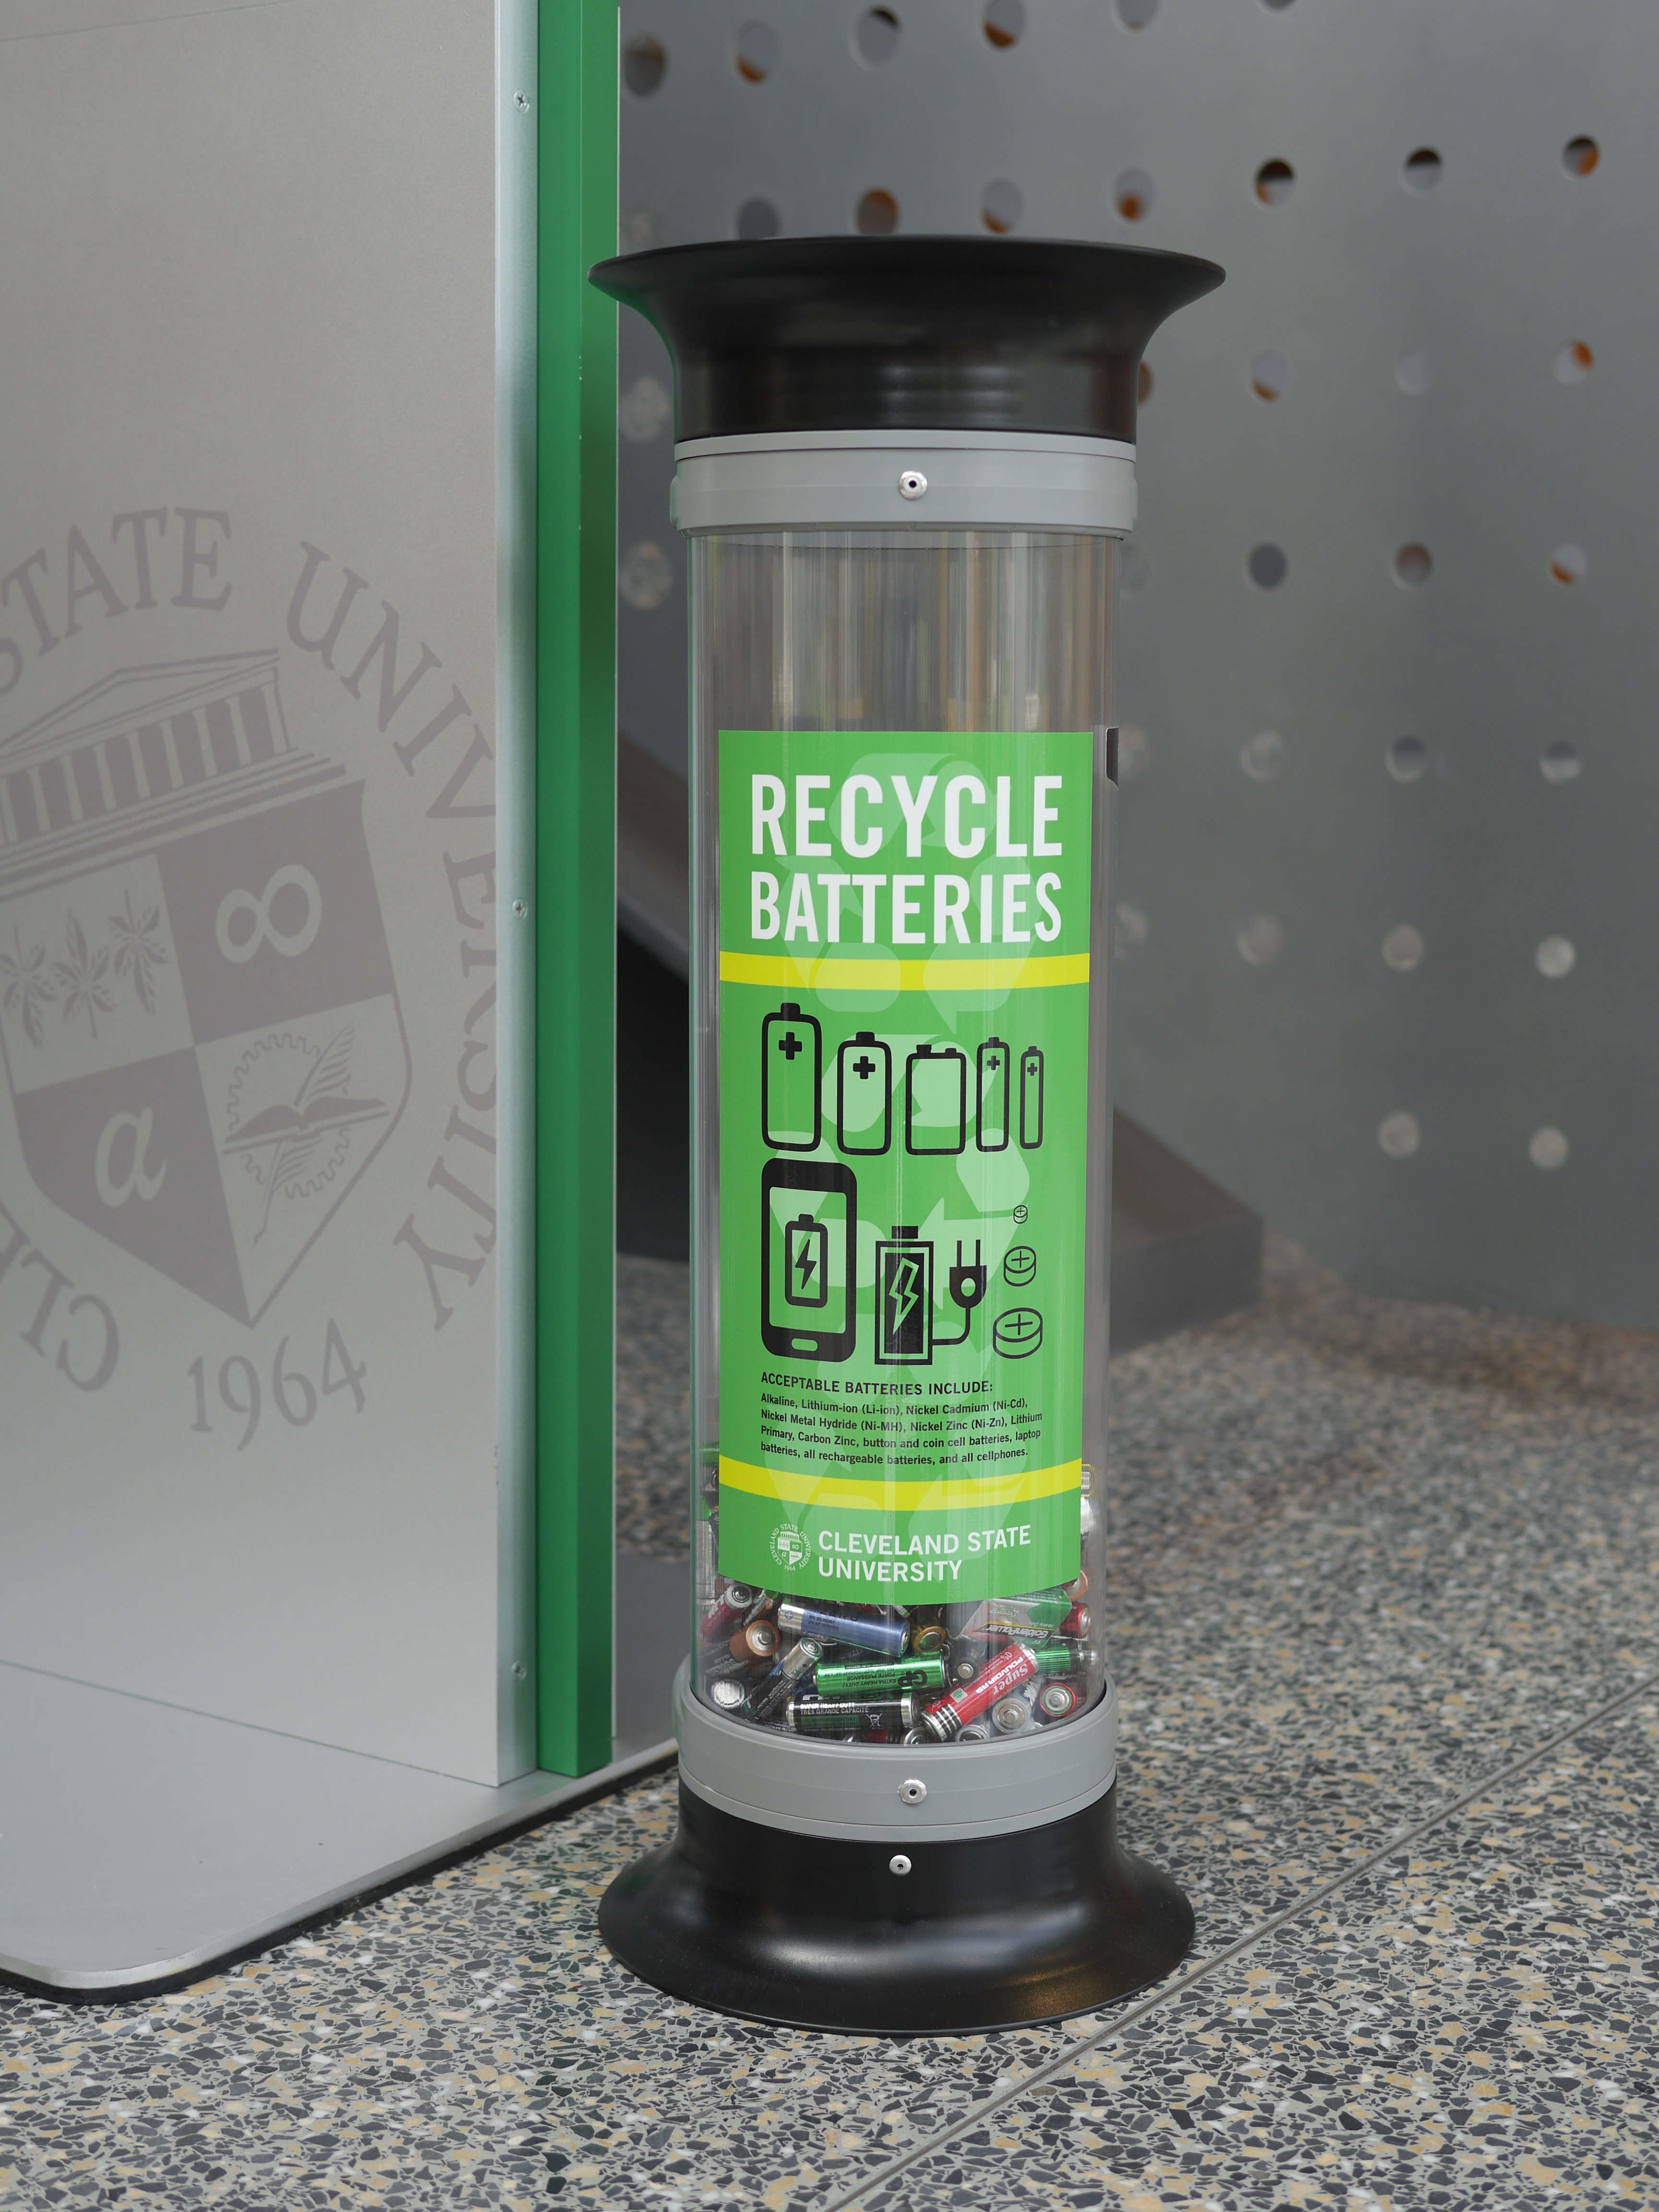 Recycle batteries. Battery Recycling Container. Recycle Battery Box. Alkaline Battery recycle. Lithium Battery Recycling.